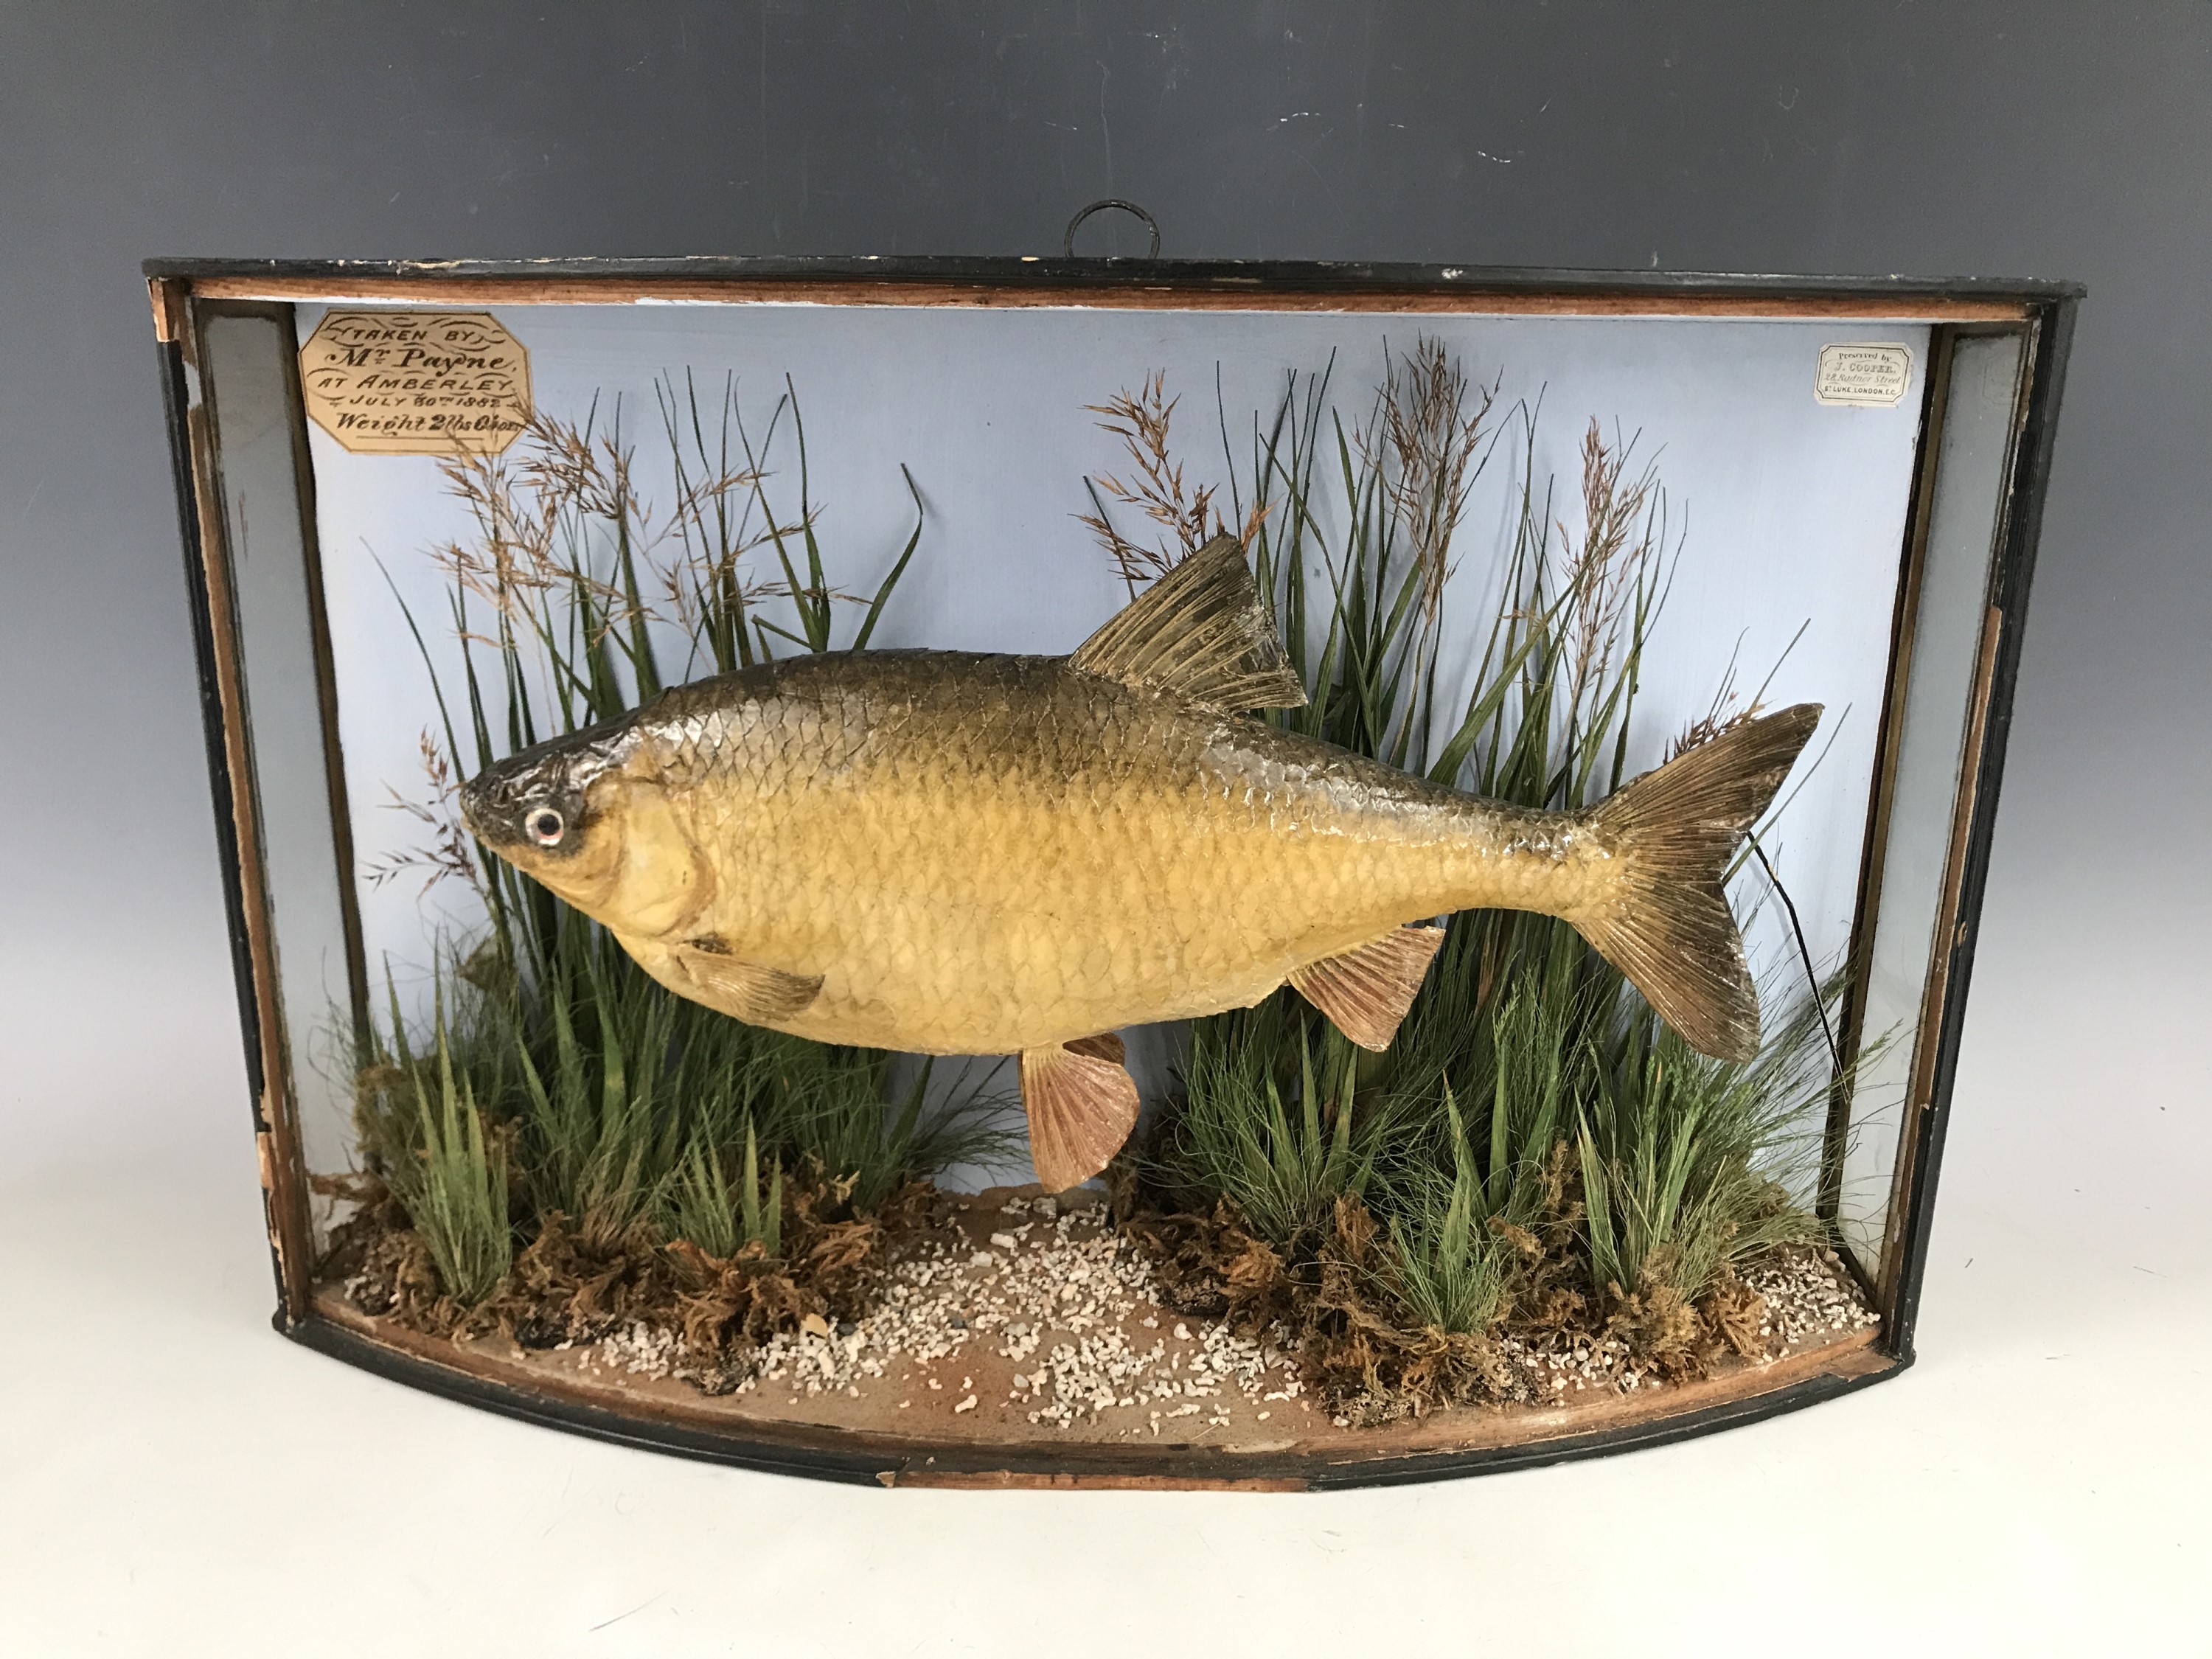 A 19th Century taxidermy fish preserved by J Cooper of 28 Radnor Street, London, bearing